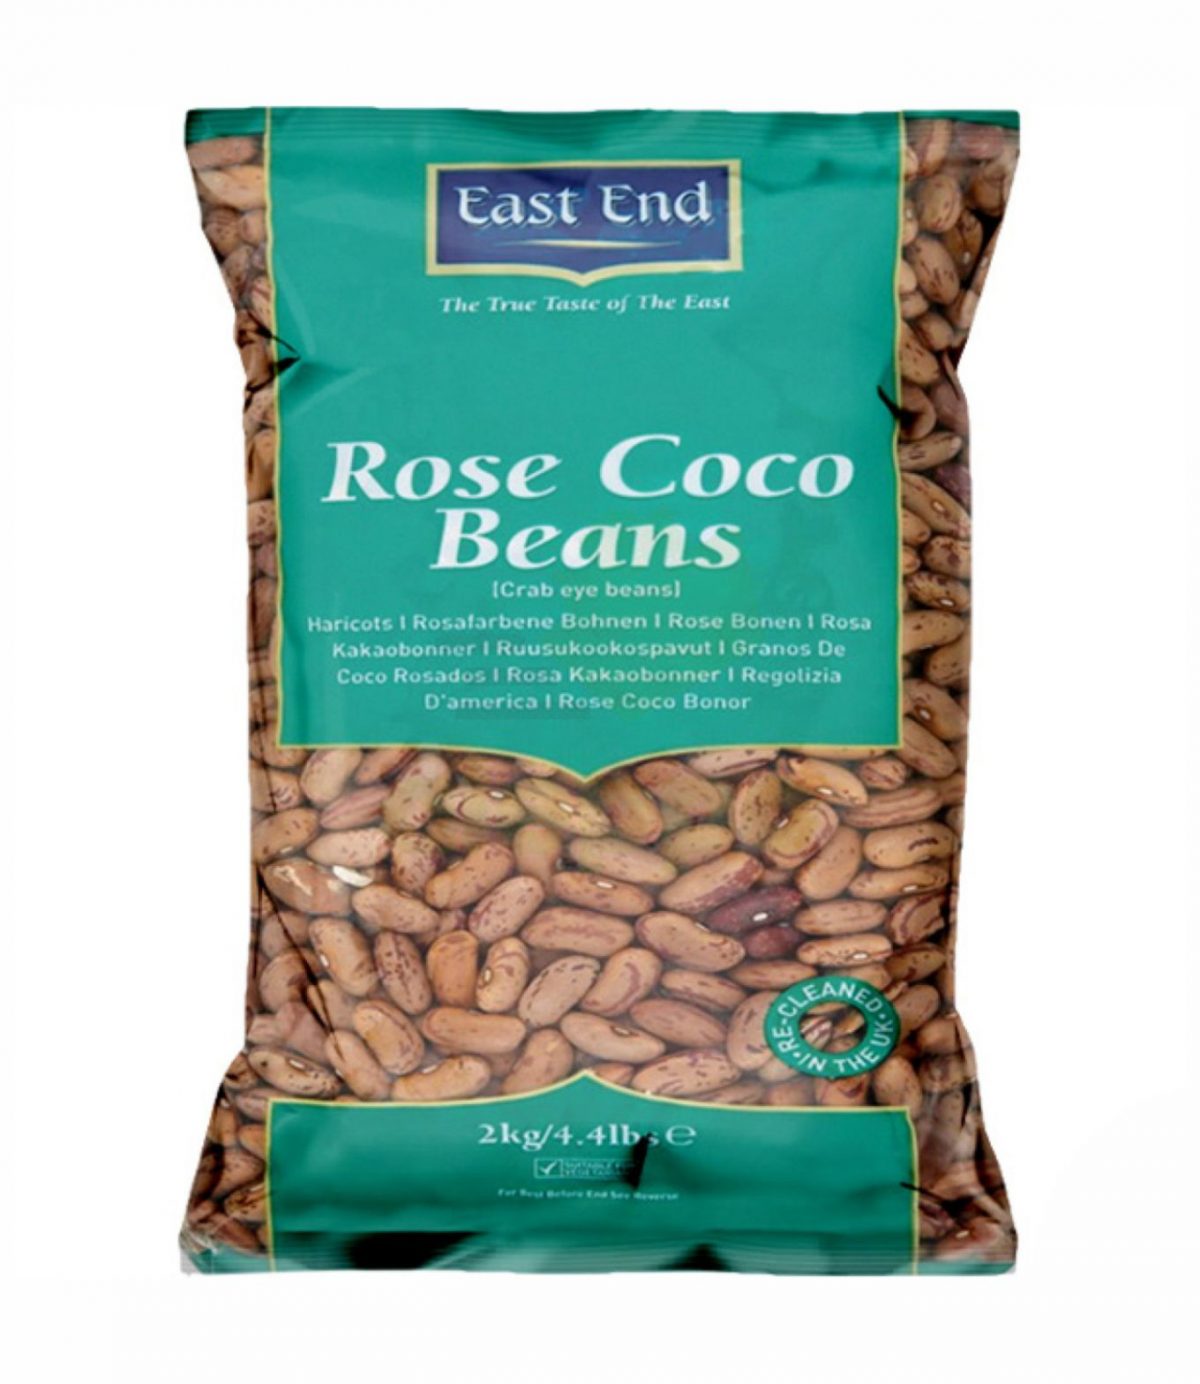 East End Rose Coco Beans 2kg